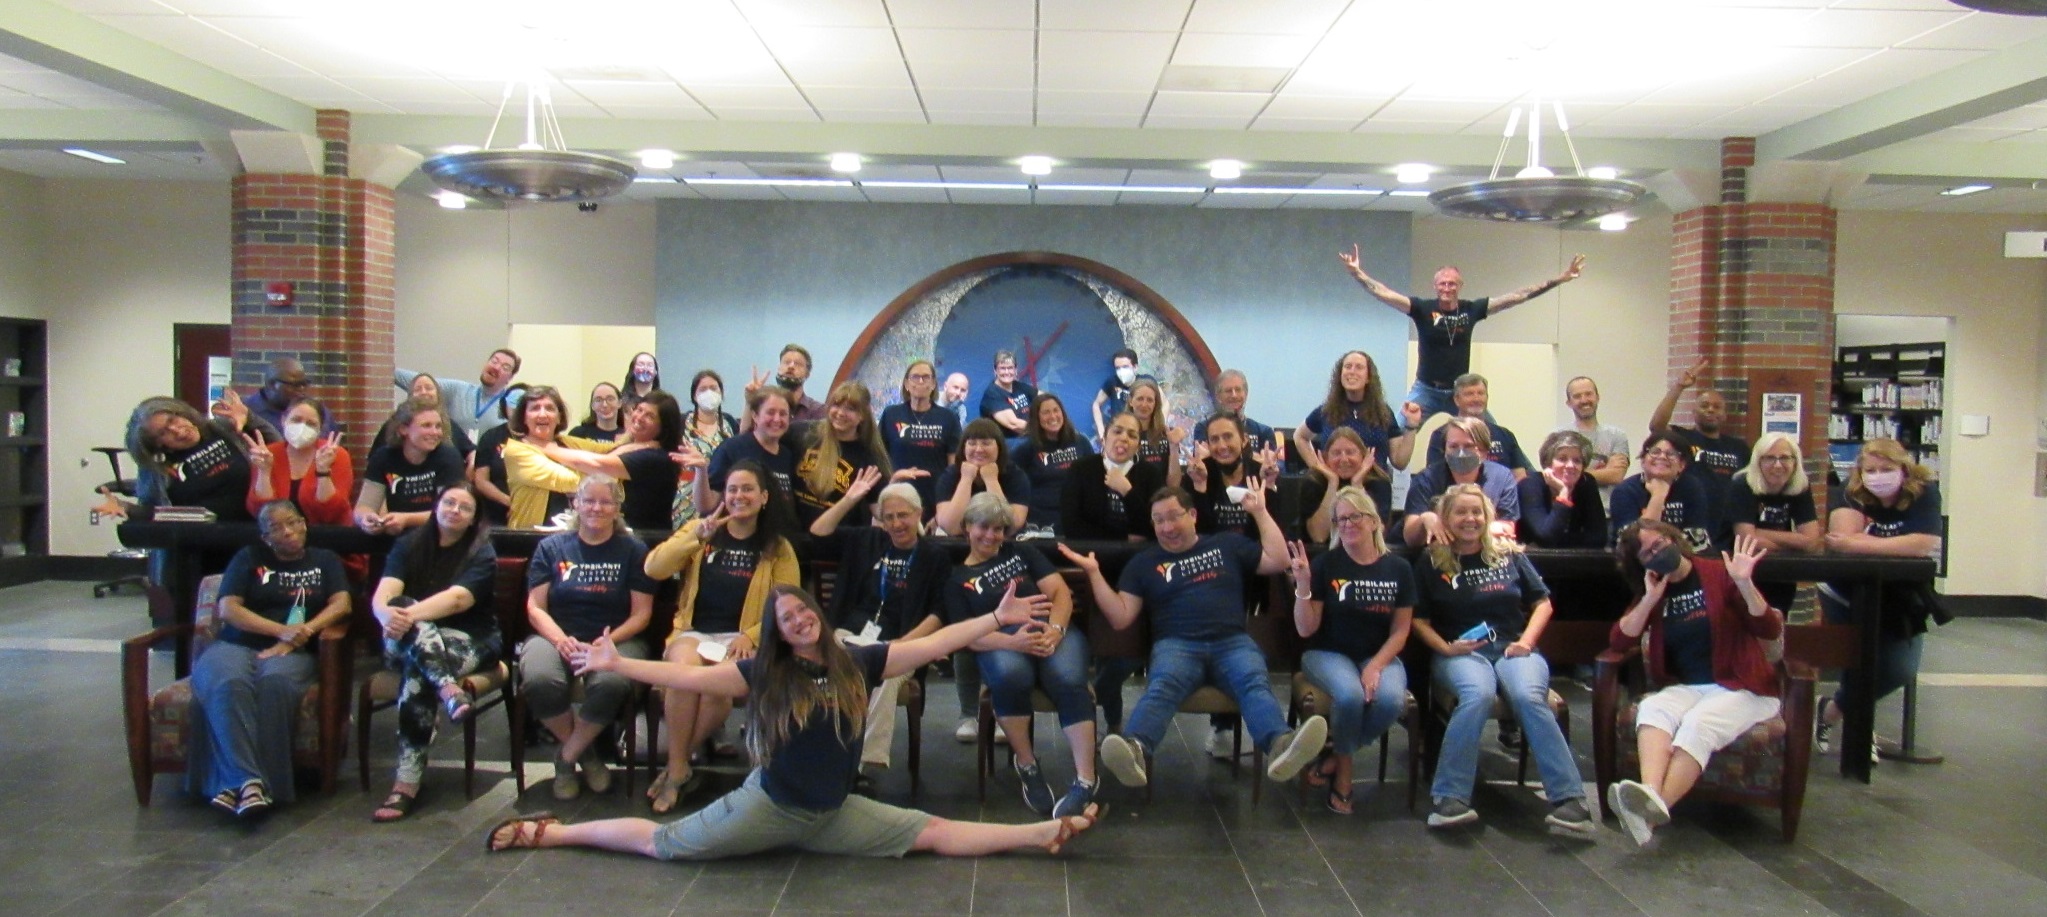 All of the library staff (about 50-60) making various silly poses in front of the front desk at YDL-Whittaker.